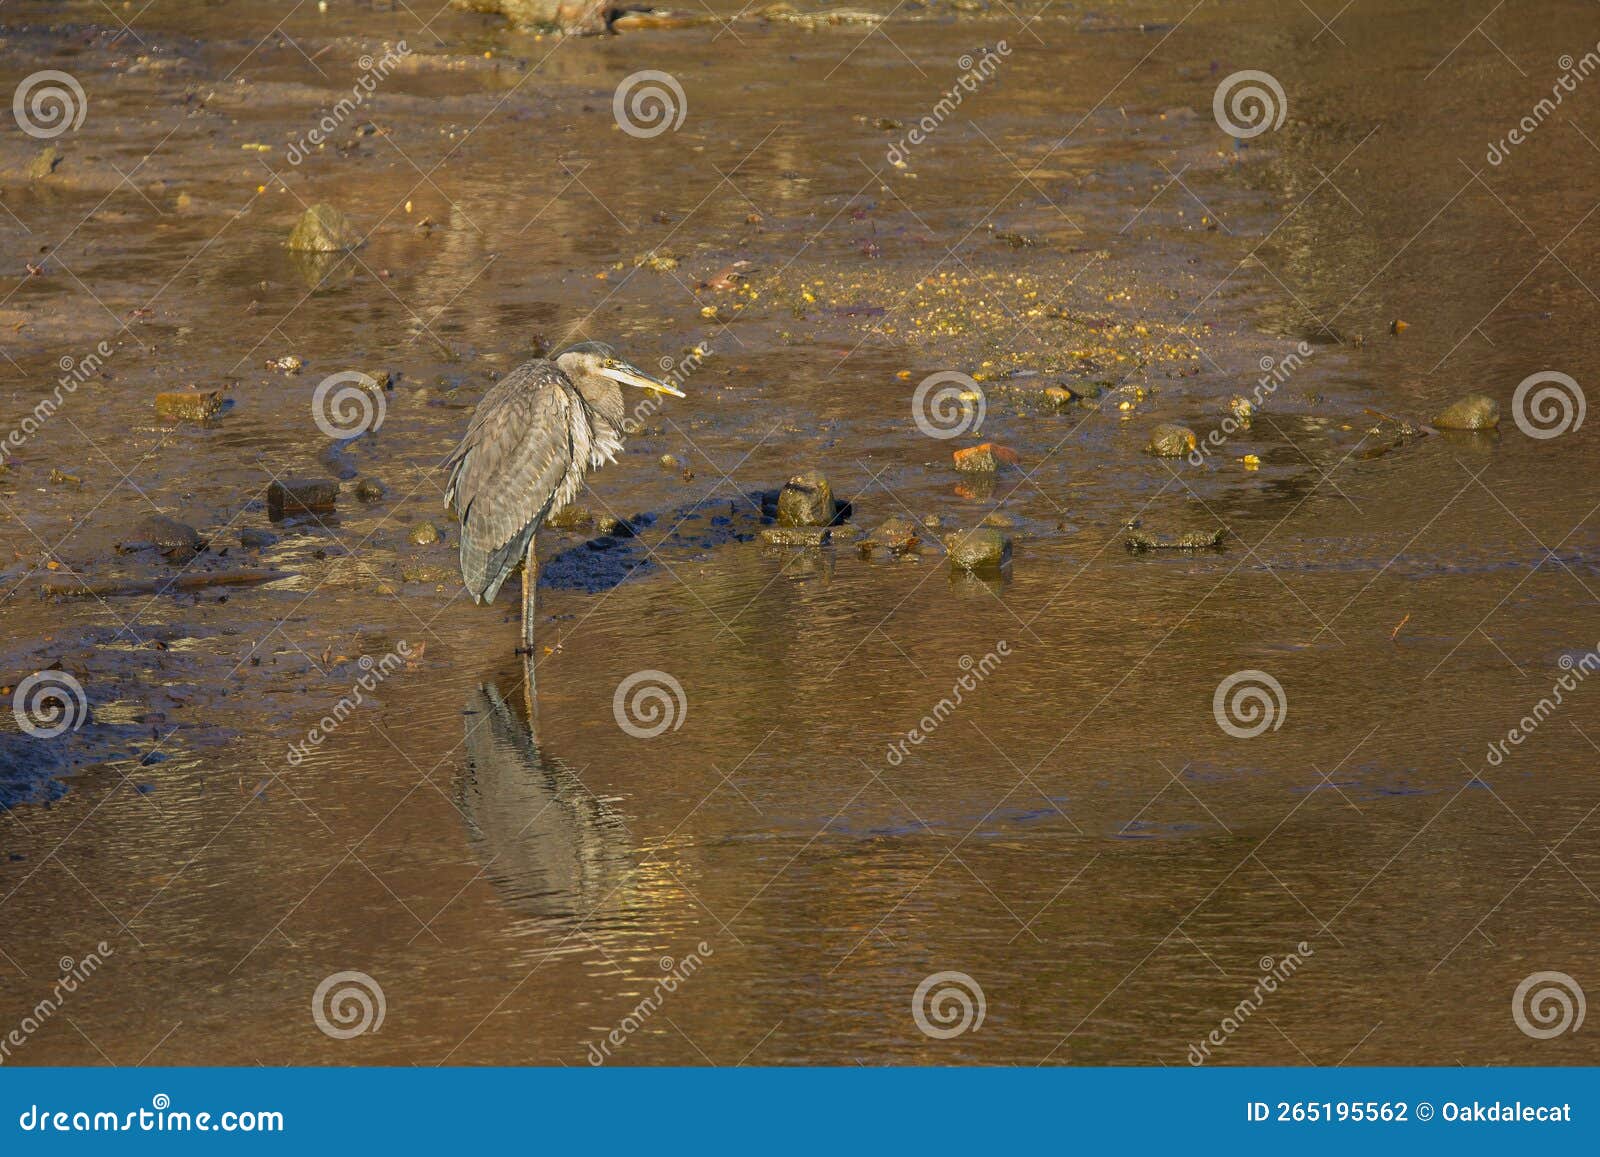 great blue heron standing in shallow stream